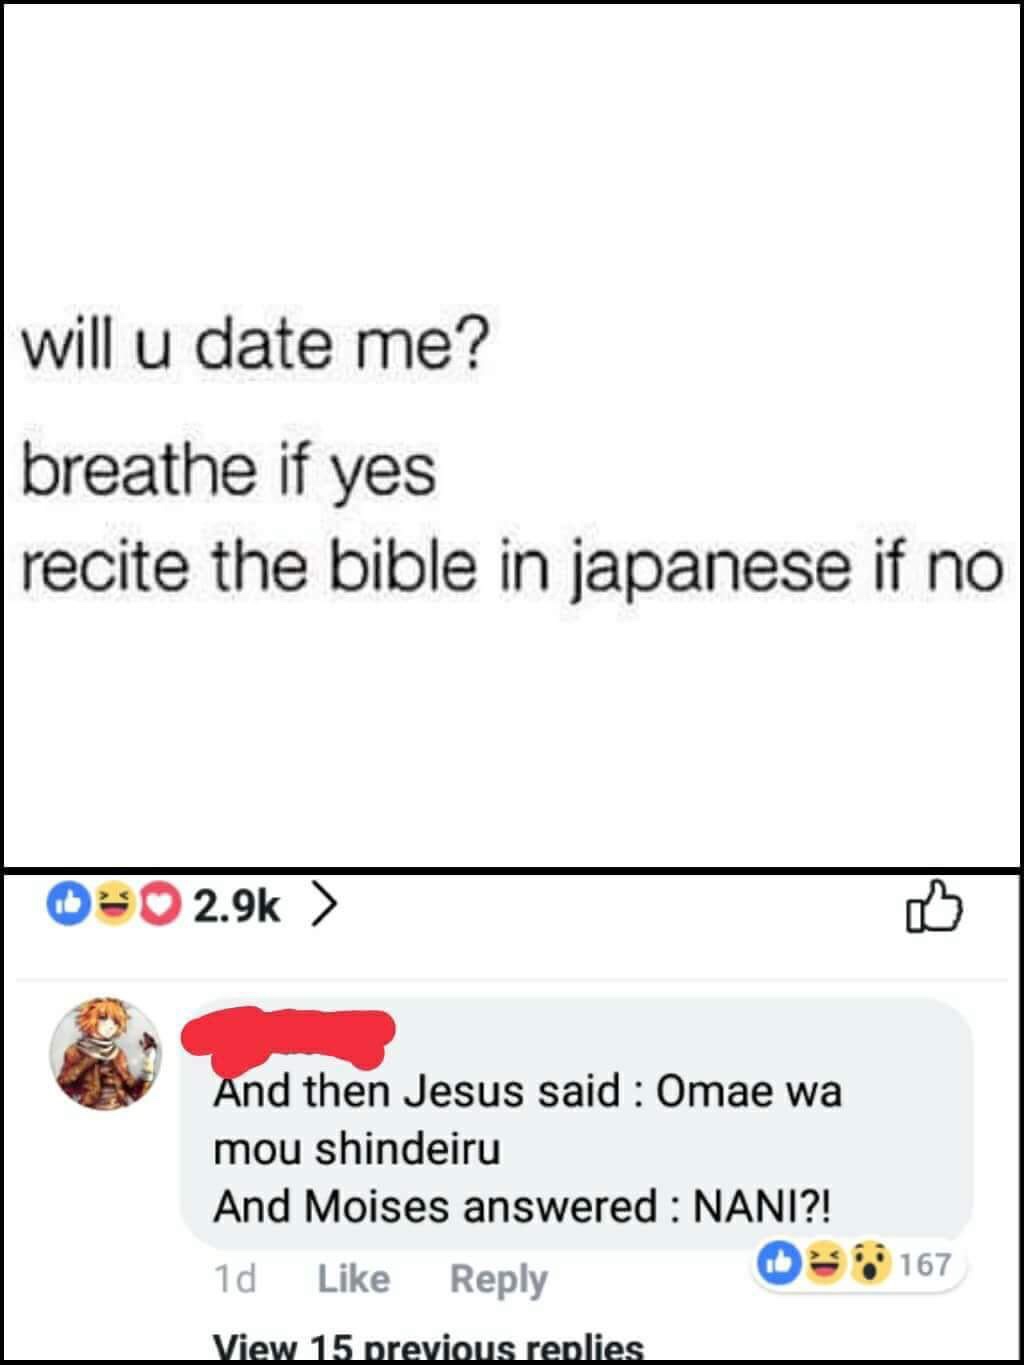 meme document - will u date me? breathe if yes recite the bible in japanese if no 0 > And then Jesus said Omae wa mou shindeiru And Moises answered Nani?! 1d 167 View 15 previous replies